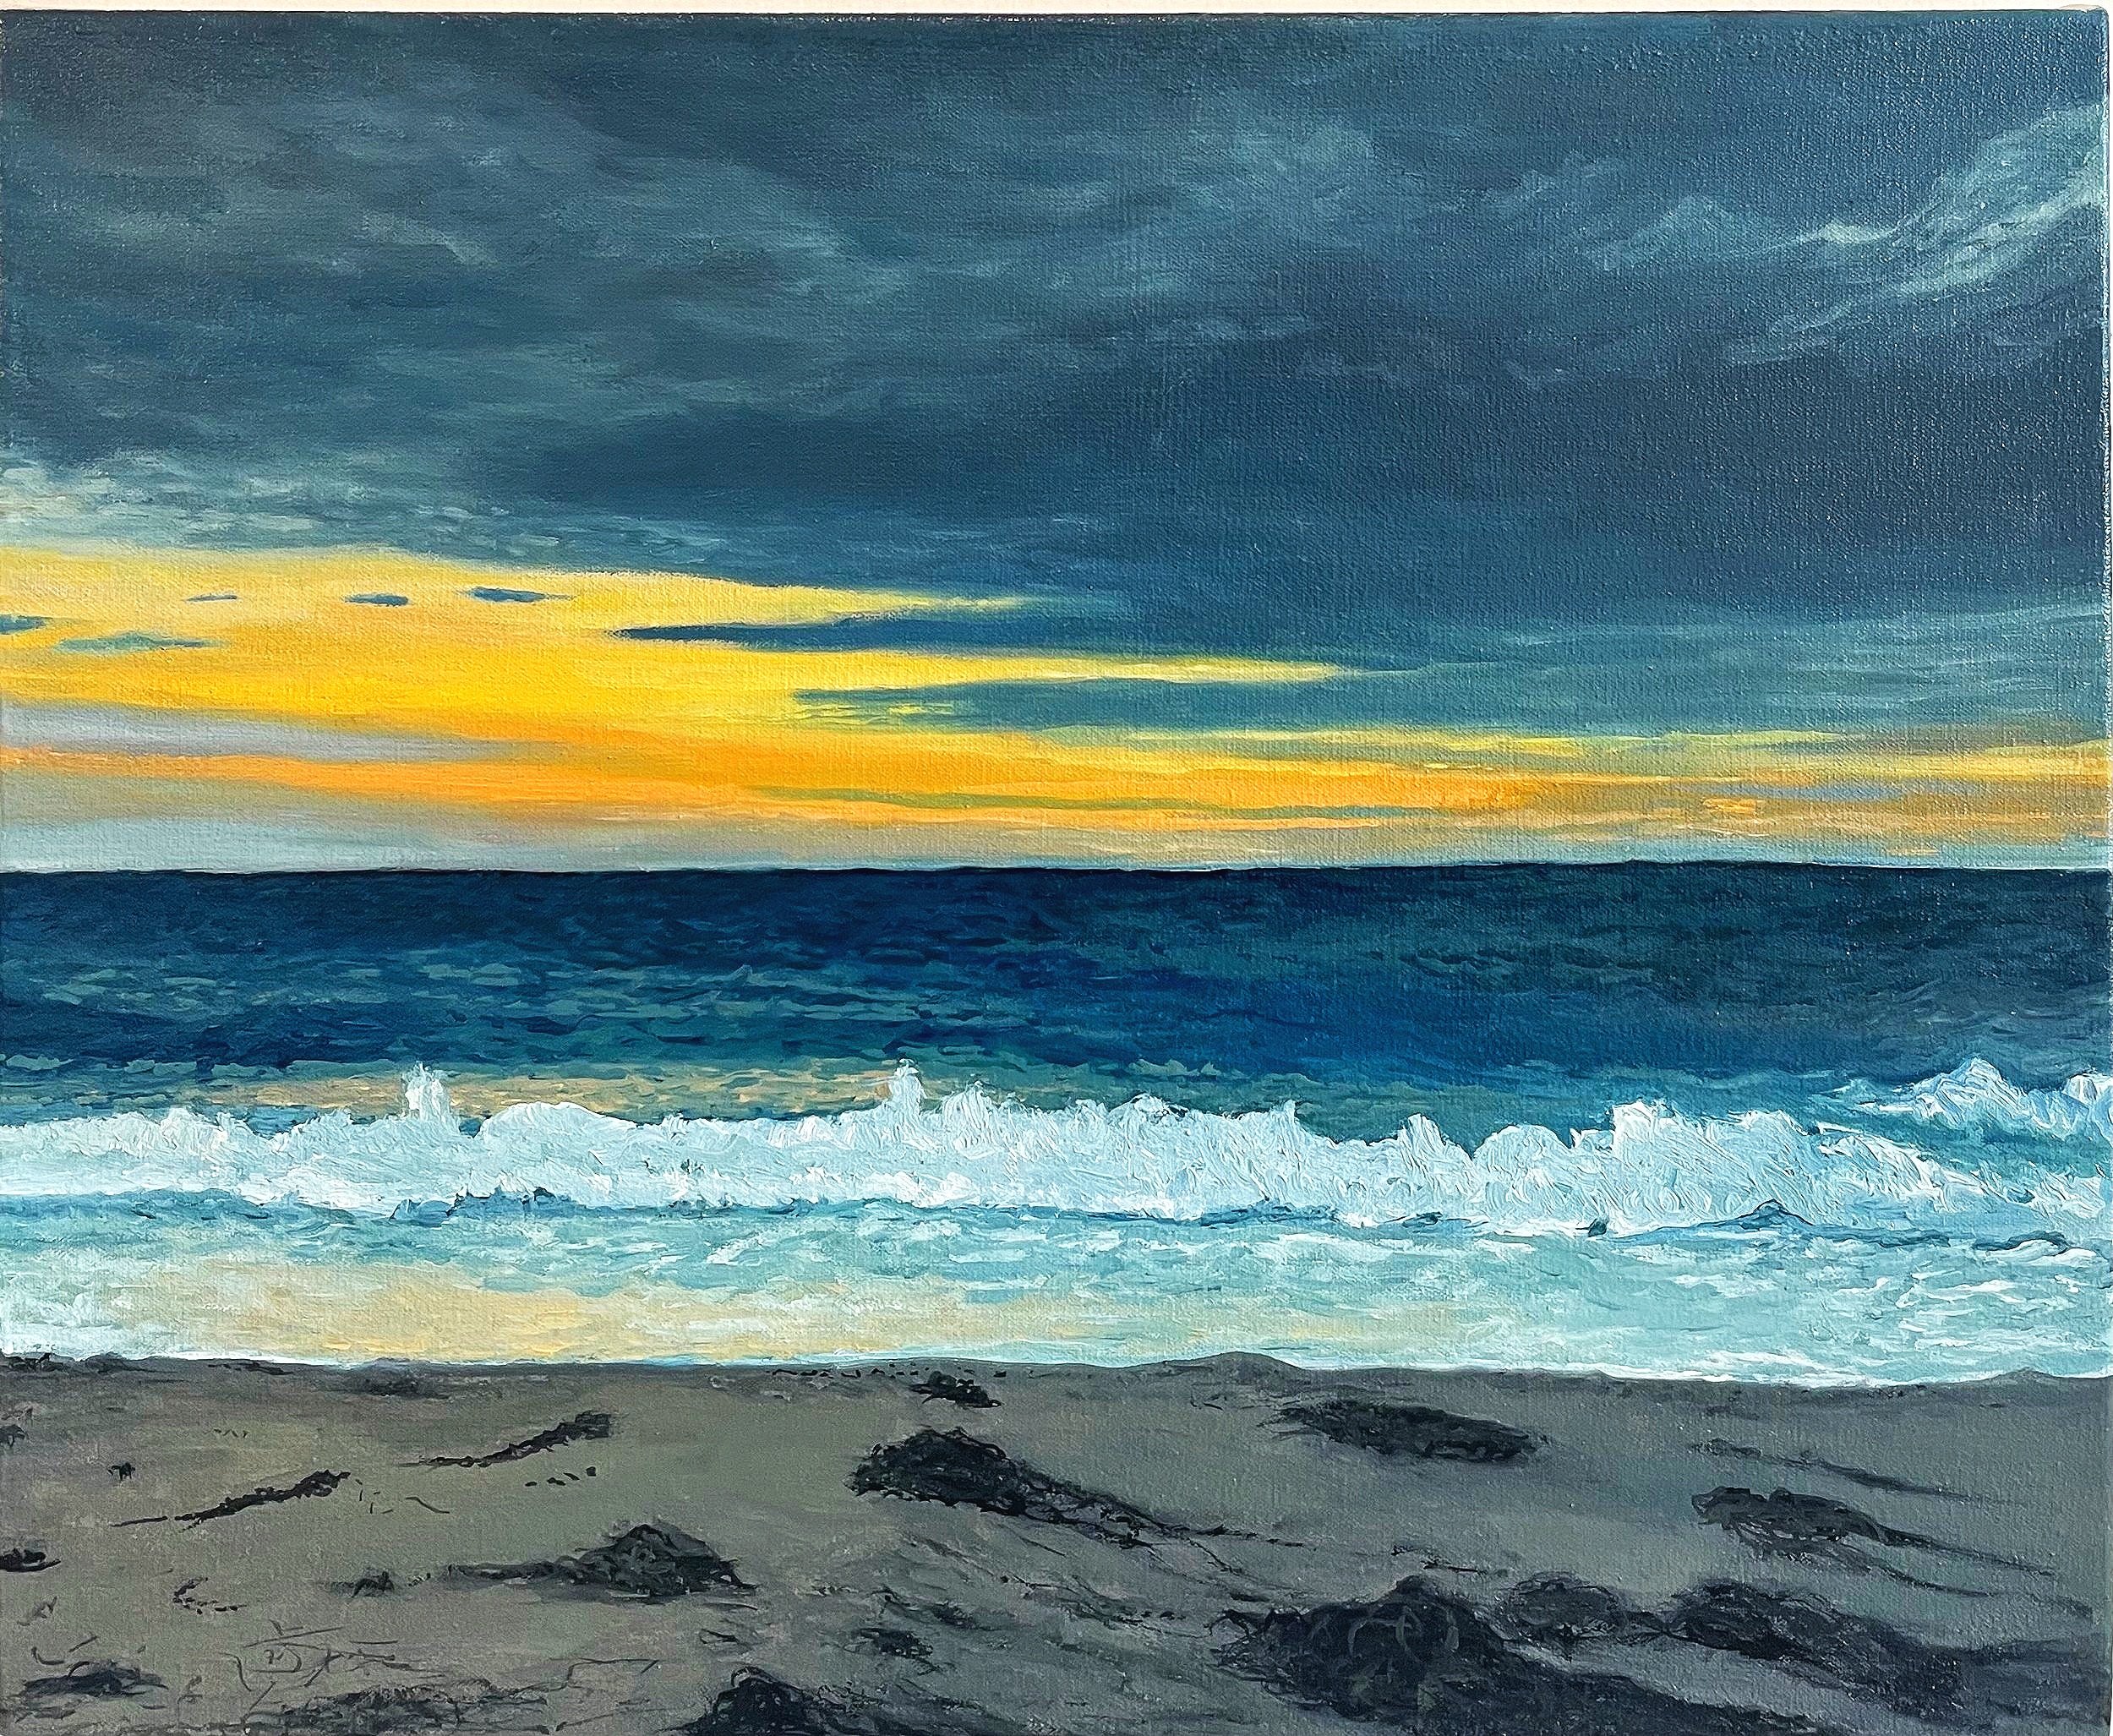   Sunset at Corn Hill Bay,  Oil on Canvas, 20” x 22”, 2022 